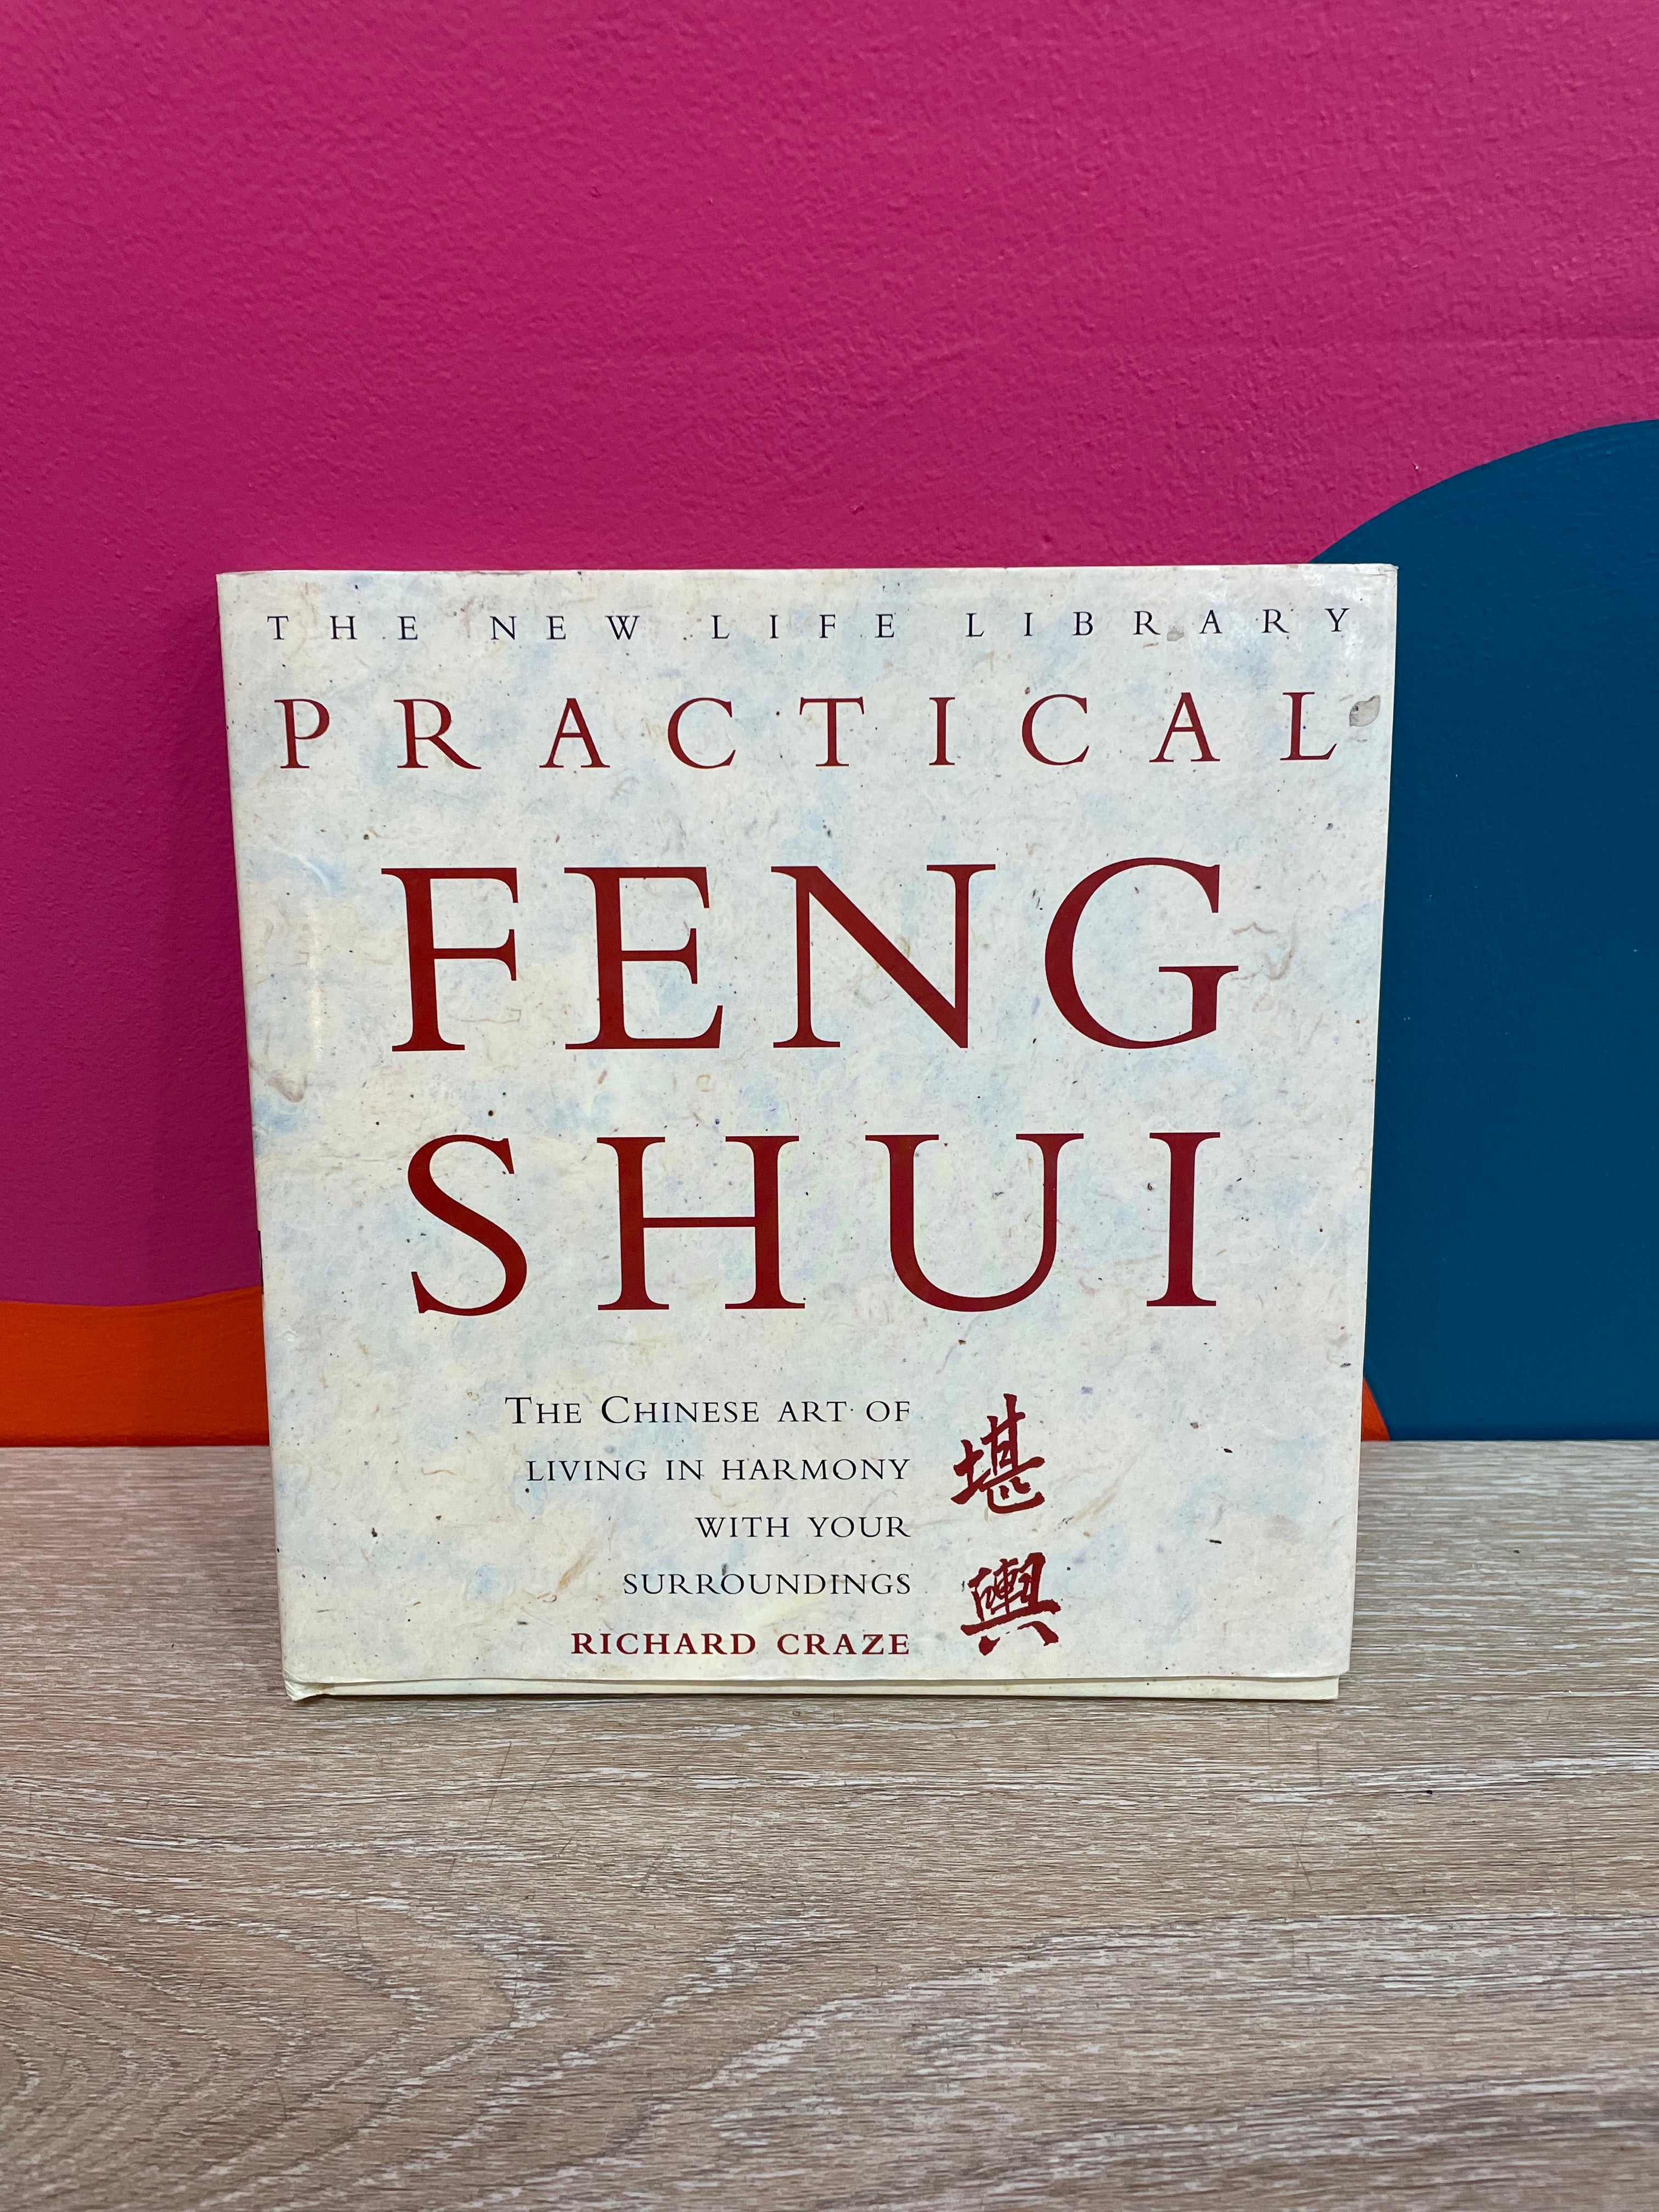 Practical Feng Shui: The Chinese Art of Living in Harmony With Your Surroundings (New Life Library Series) - Hardcover